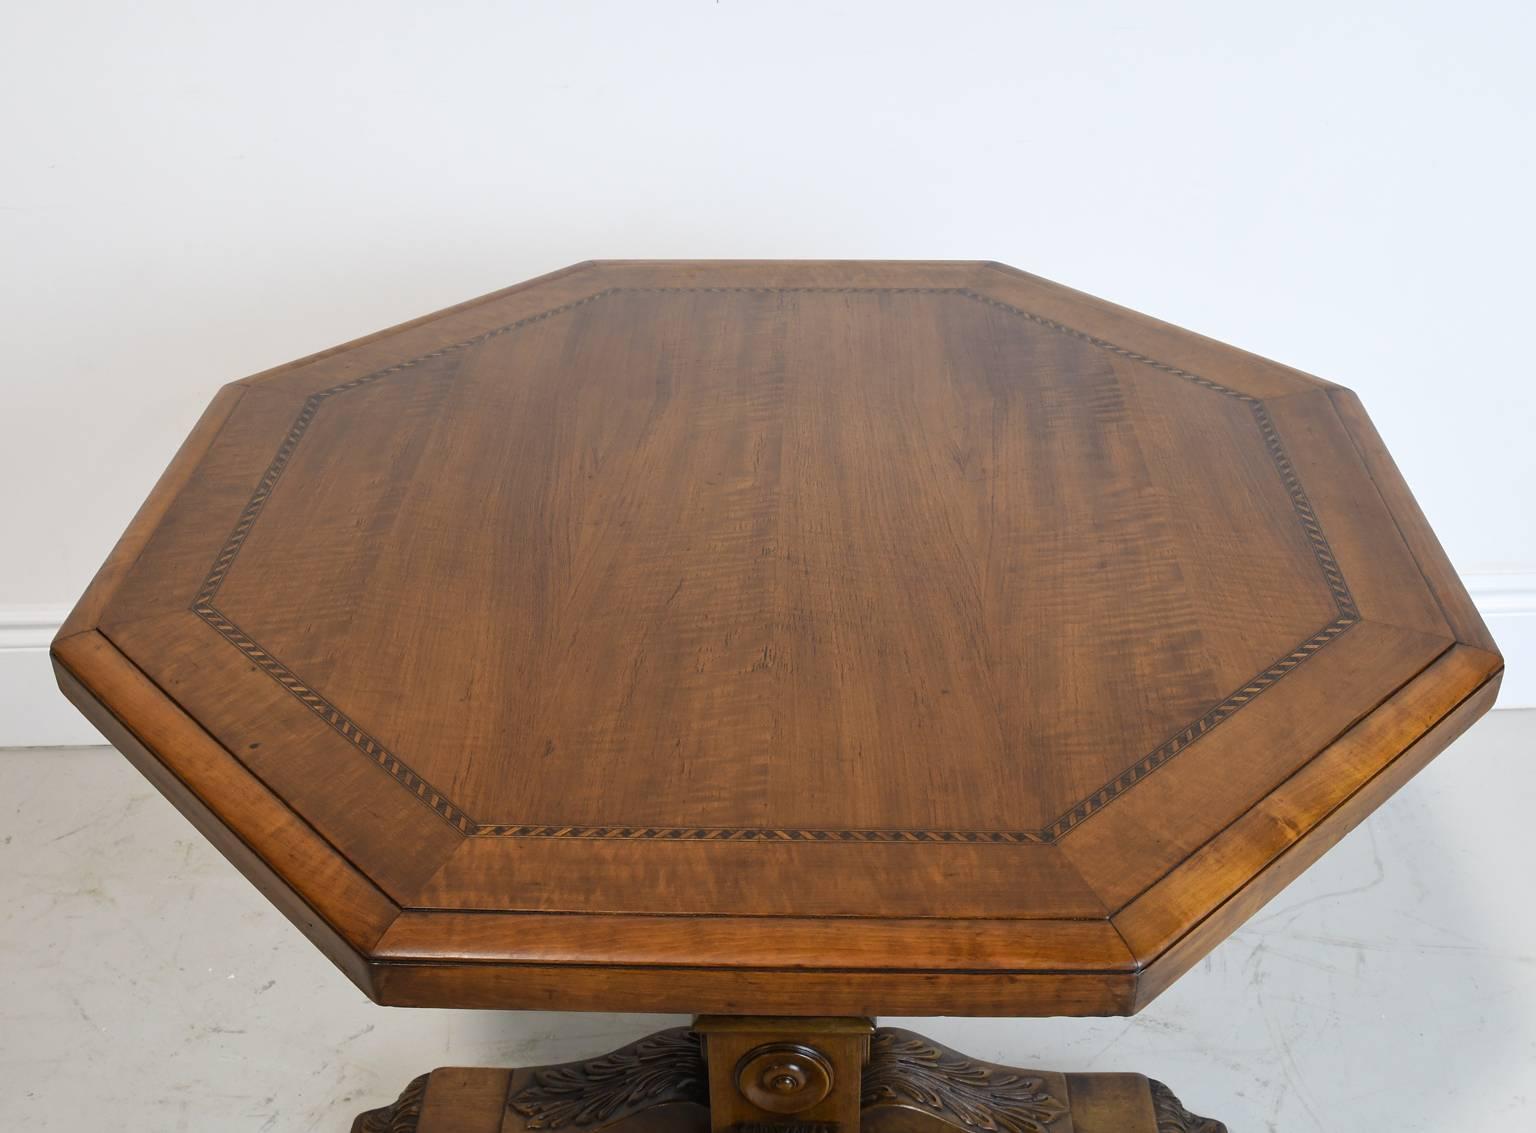 Hand-Carved Belle Époque Table with Inlaid Octagonal Top over Carved Pedestal Base